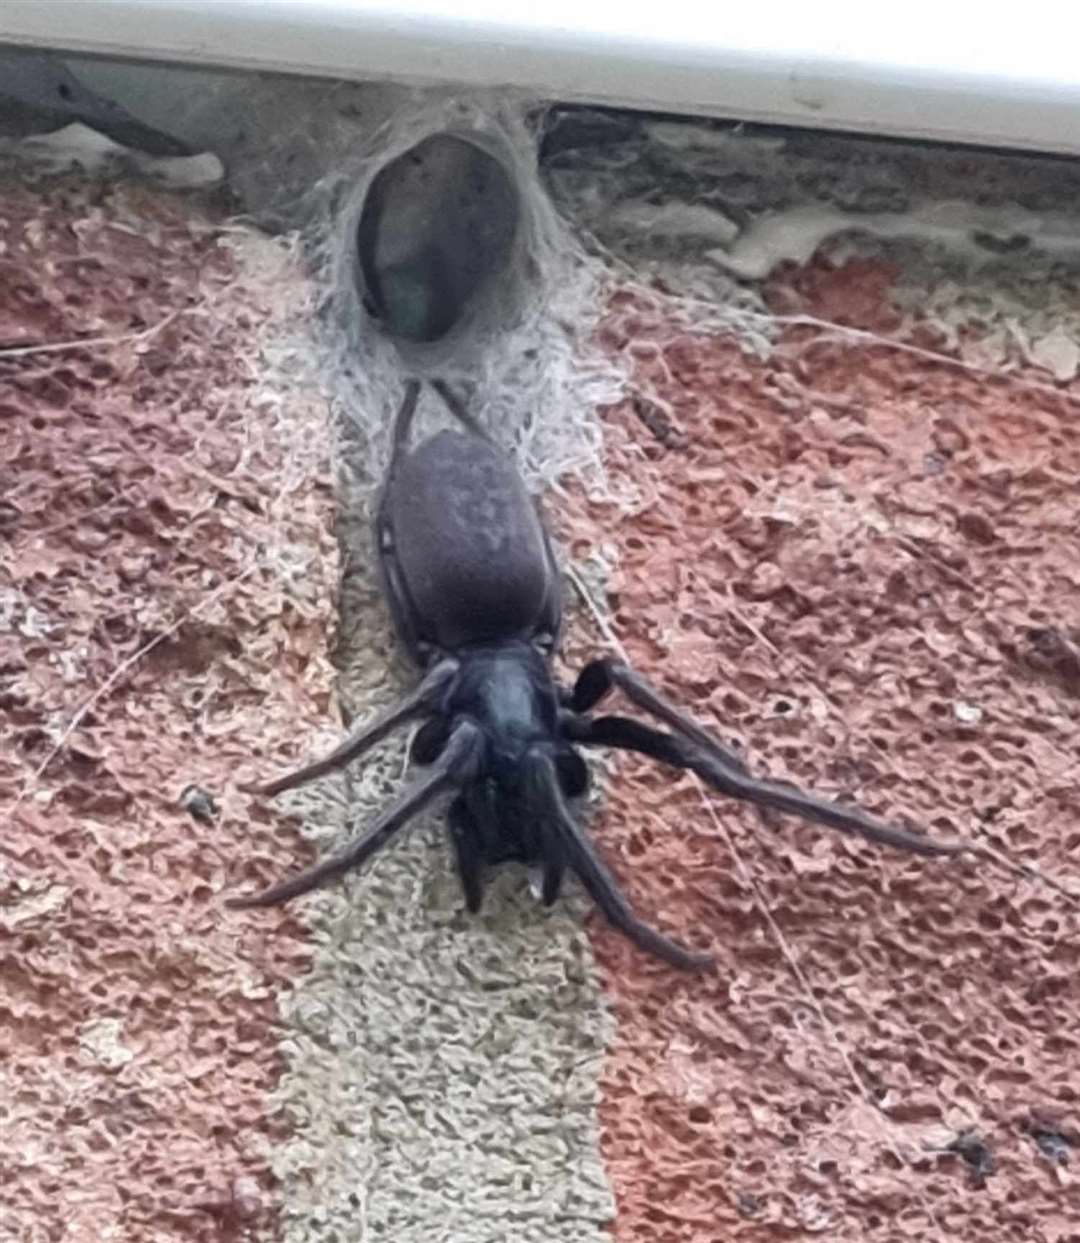 Pictures of the spider caused a stir on Facebook